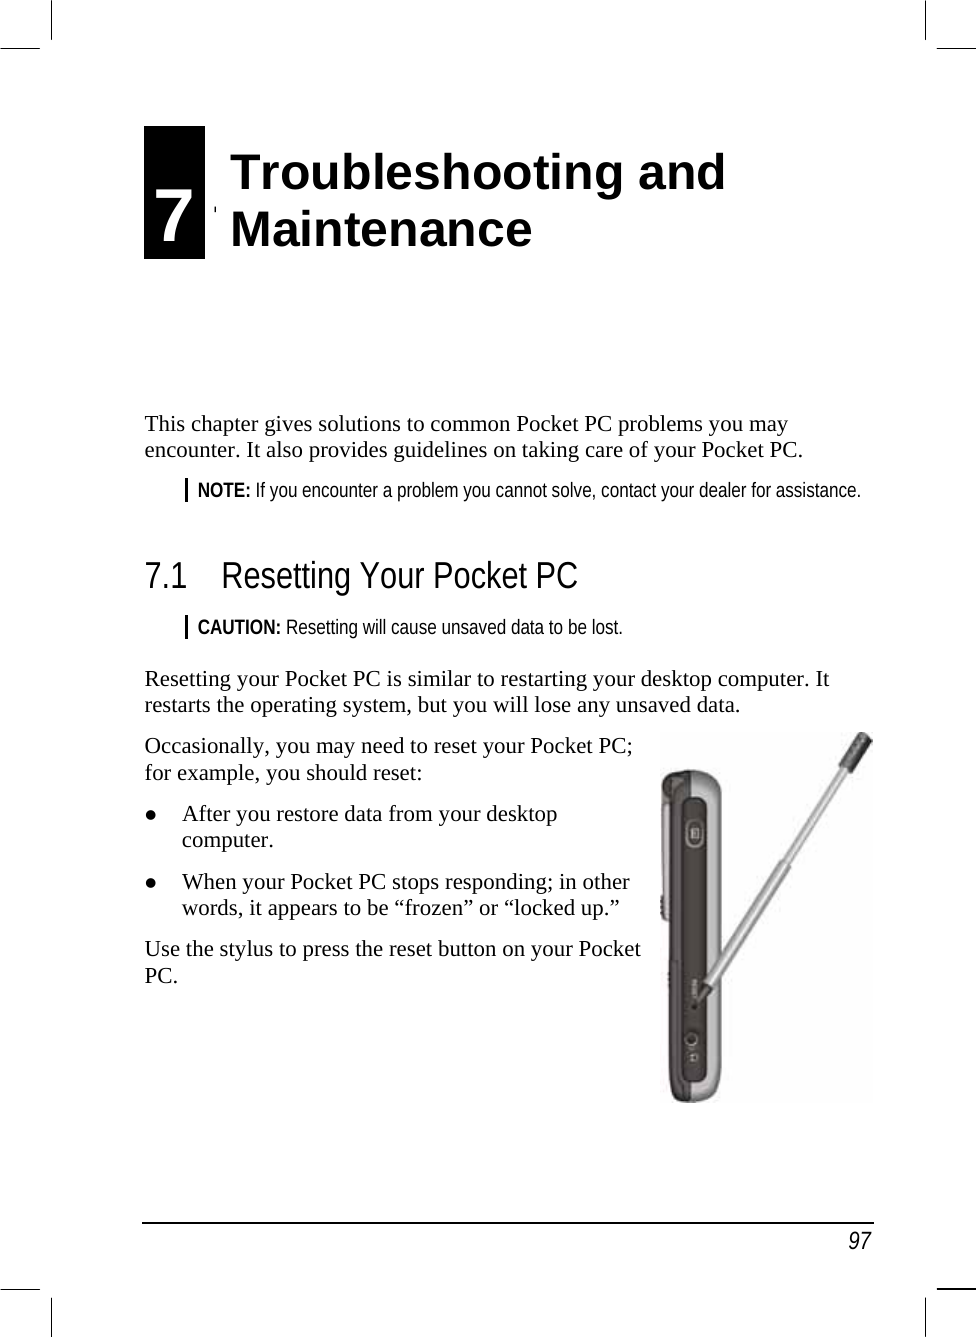   97 7 Troubleshooting and   Maintenance This chapter gives solutions to common Pocket PC problems you may encounter. It also provides guidelines on taking care of your Pocket PC. NOTE: If you encounter a problem you cannot solve, contact your dealer for assistance.  7.1  Resetting Your Pocket PC CAUTION: Resetting will cause unsaved data to be lost.  Resetting your Pocket PC is similar to restarting your desktop computer. It restarts the operating system, but you will lose any unsaved data. Occasionally, you may need to reset your Pocket PC; for example, you should reset:   After you restore data from your desktop computer.   When your Pocket PC stops responding; in other words, it appears to be “frozen” or “locked up.” Use the stylus to press the reset button on your Pocket PC.    Troubleshooting and  Maintenance 